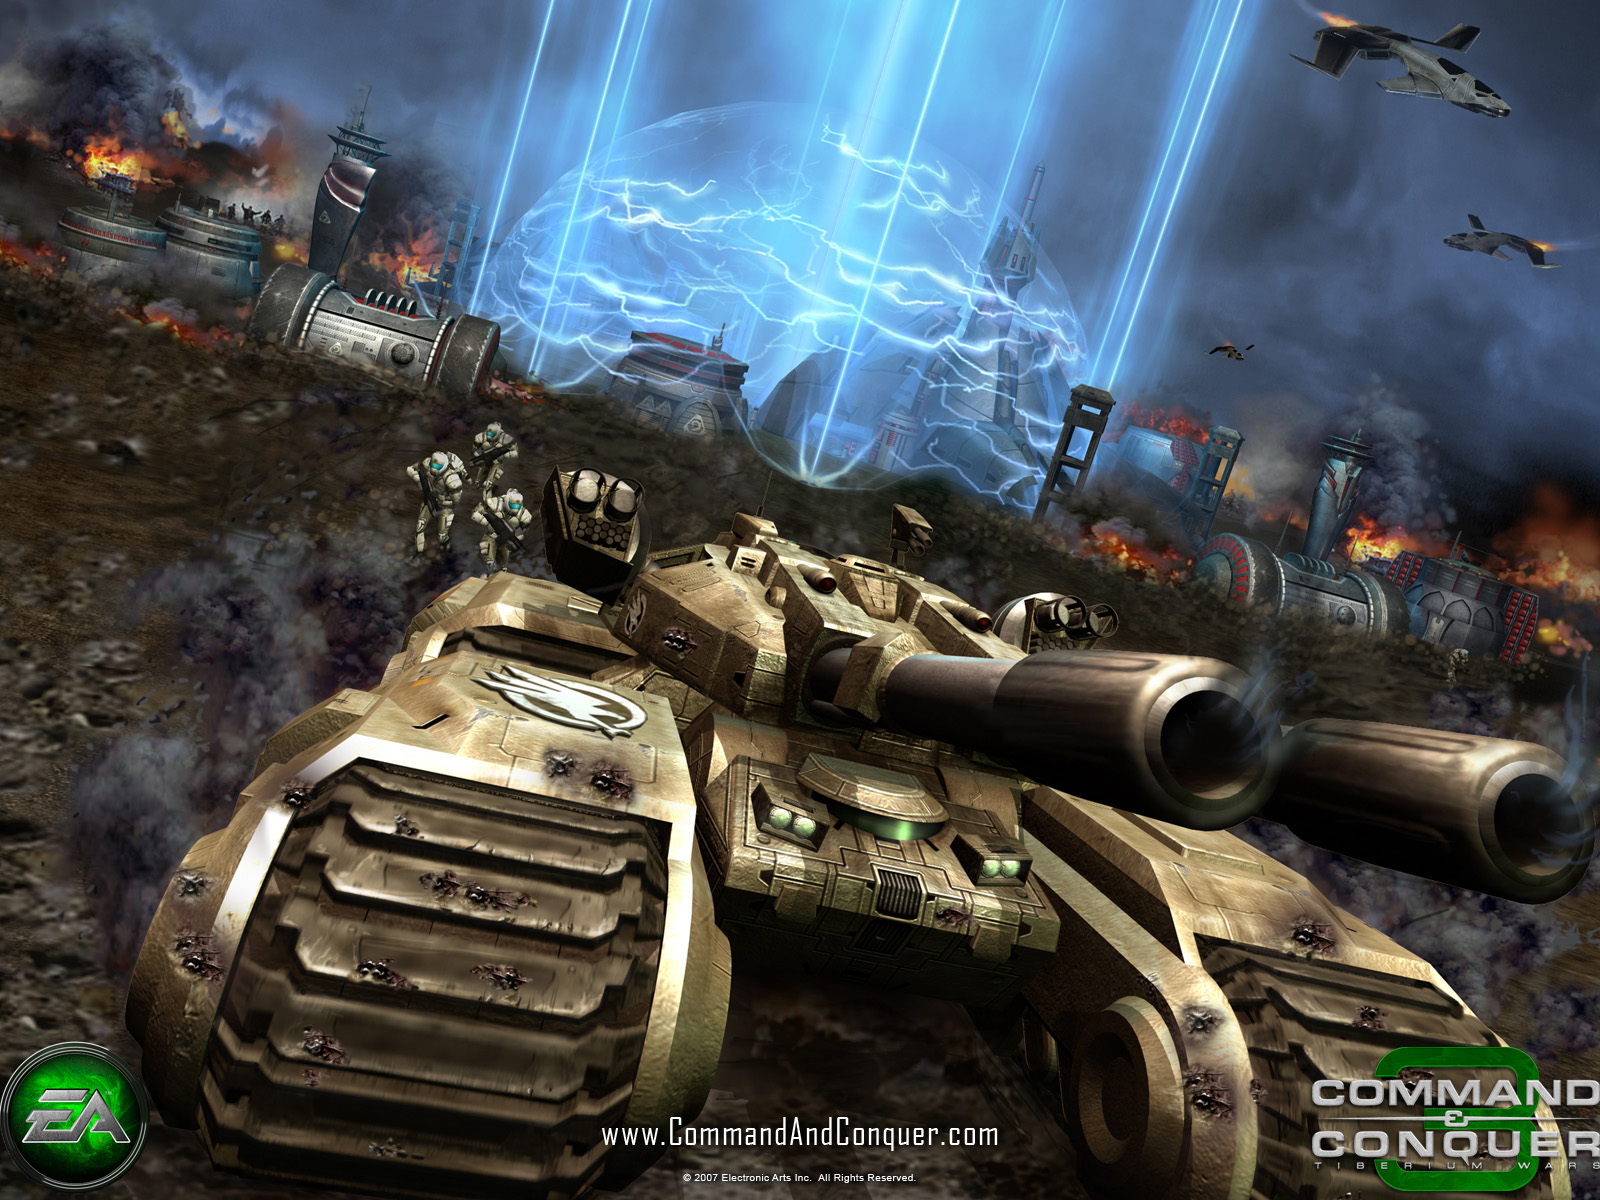 Wallpapers Command & Conquer Command & Conquer Tiberium Wars Games